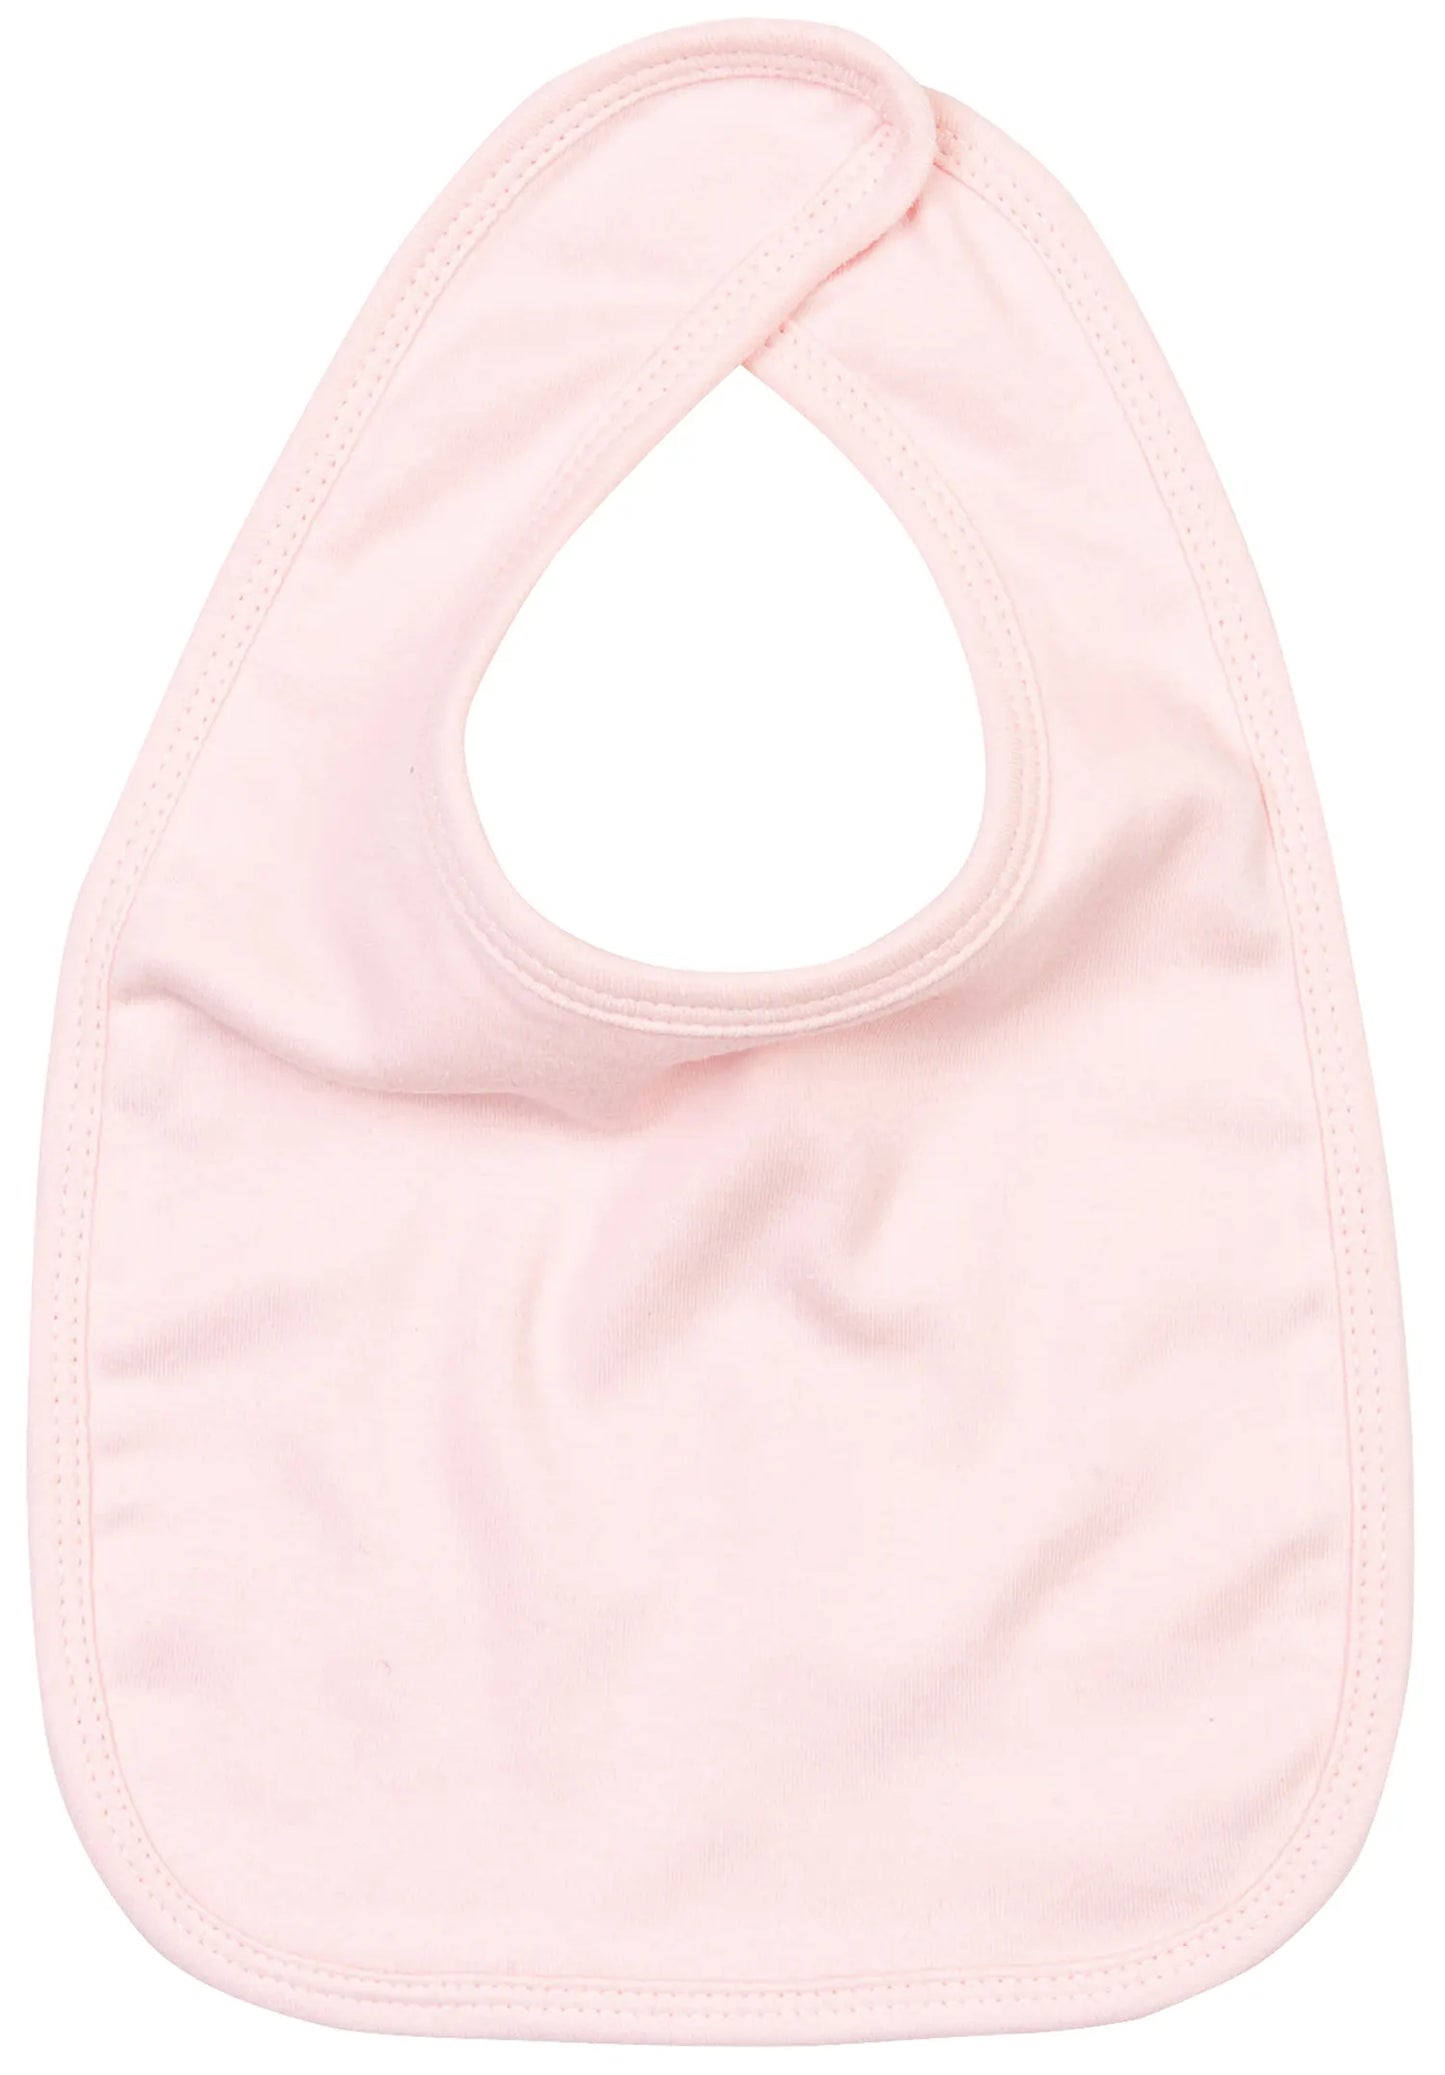 Age & Name Personalised Embroidered Baby Bib